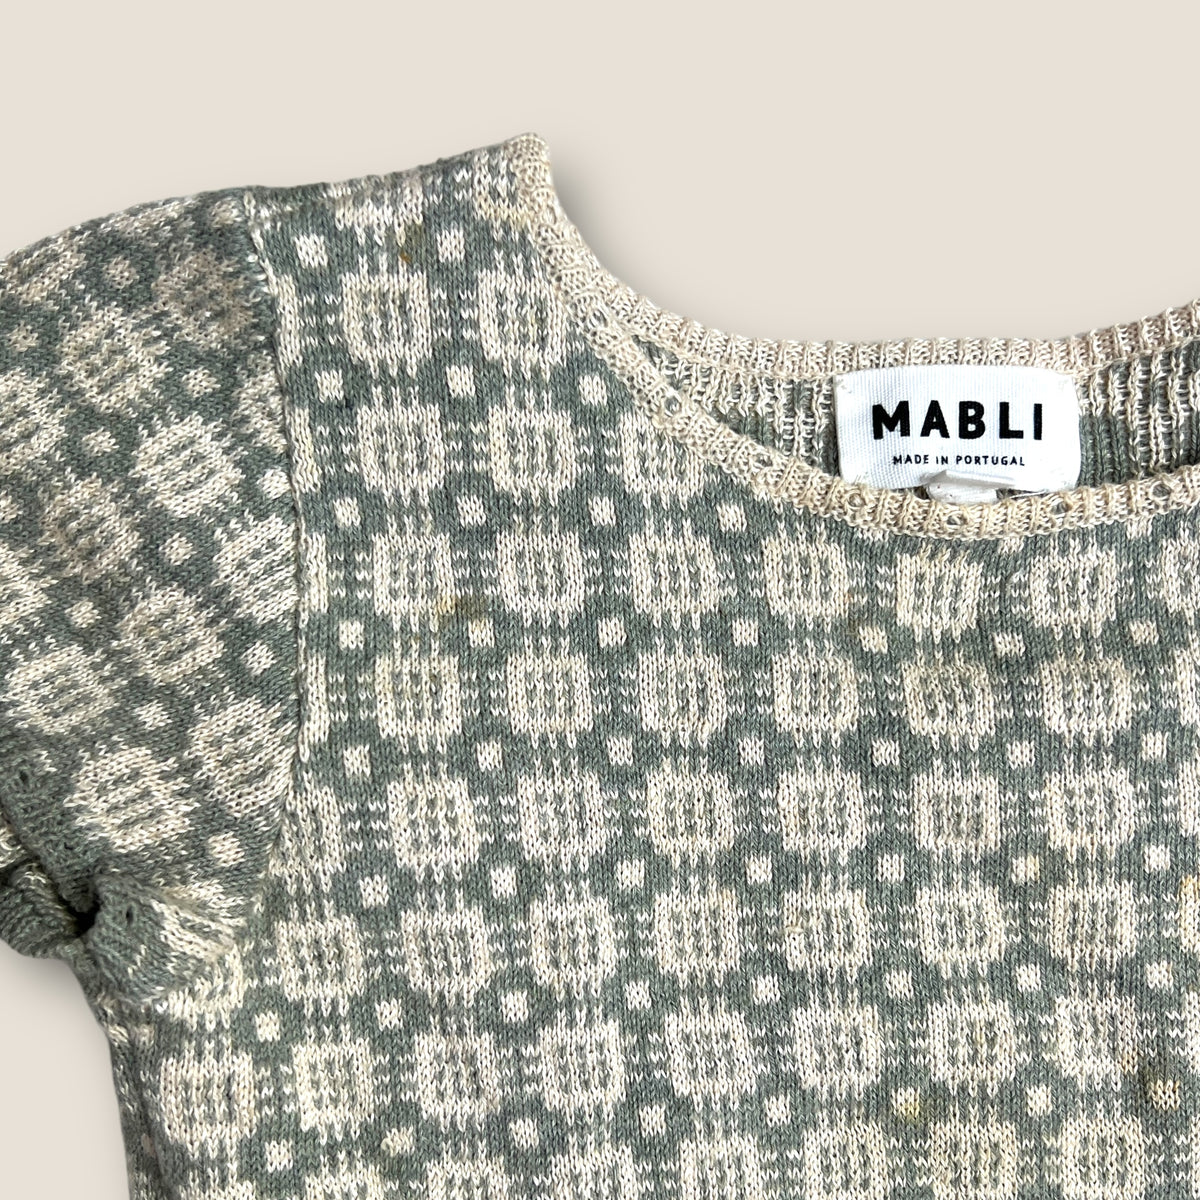 Mabli Cotton / Linen Knit Top size 2 years